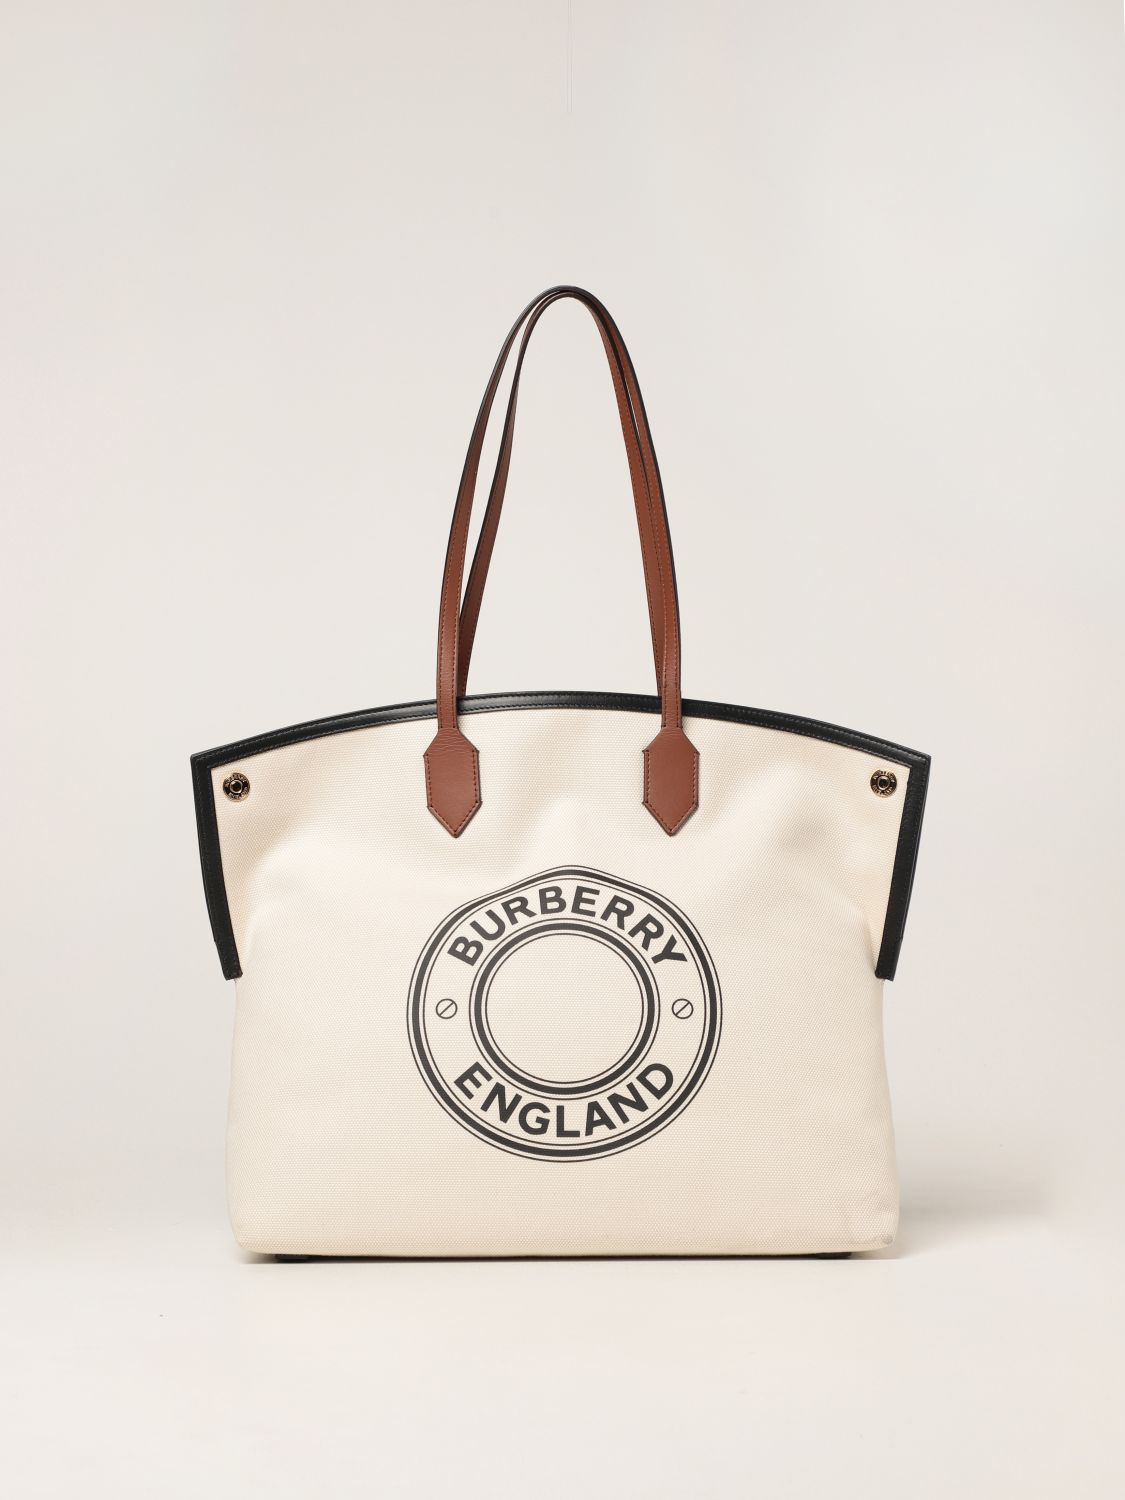 BURBERRY Tote Bag 8032163 LL LG SOCIETY TOTE Large Society Tote BURBERRY  LO